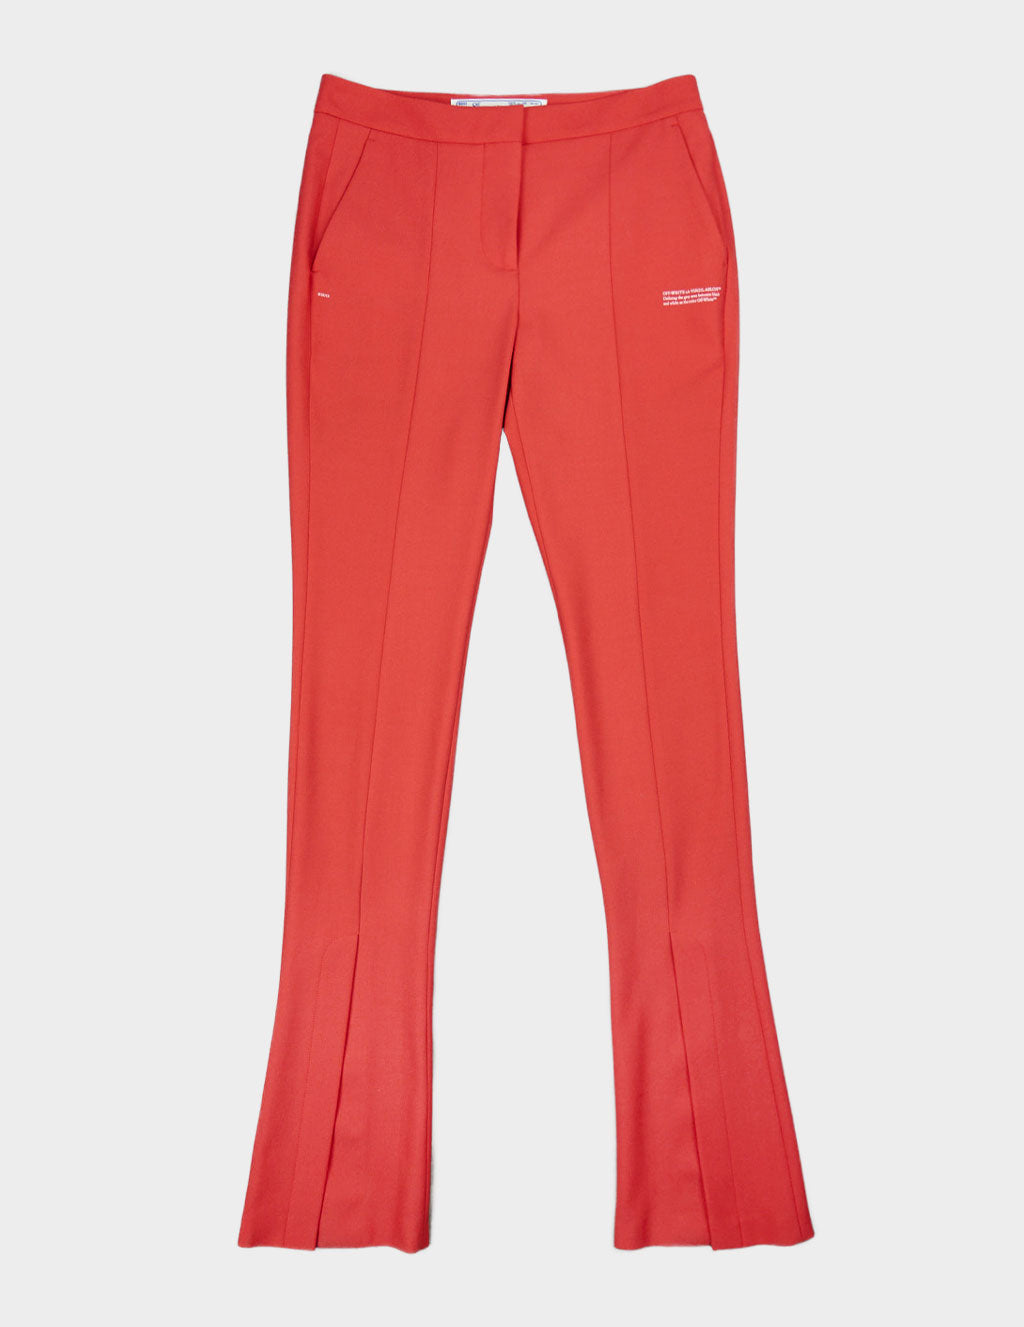 Off-White Women's Corporate Tailored Pants product